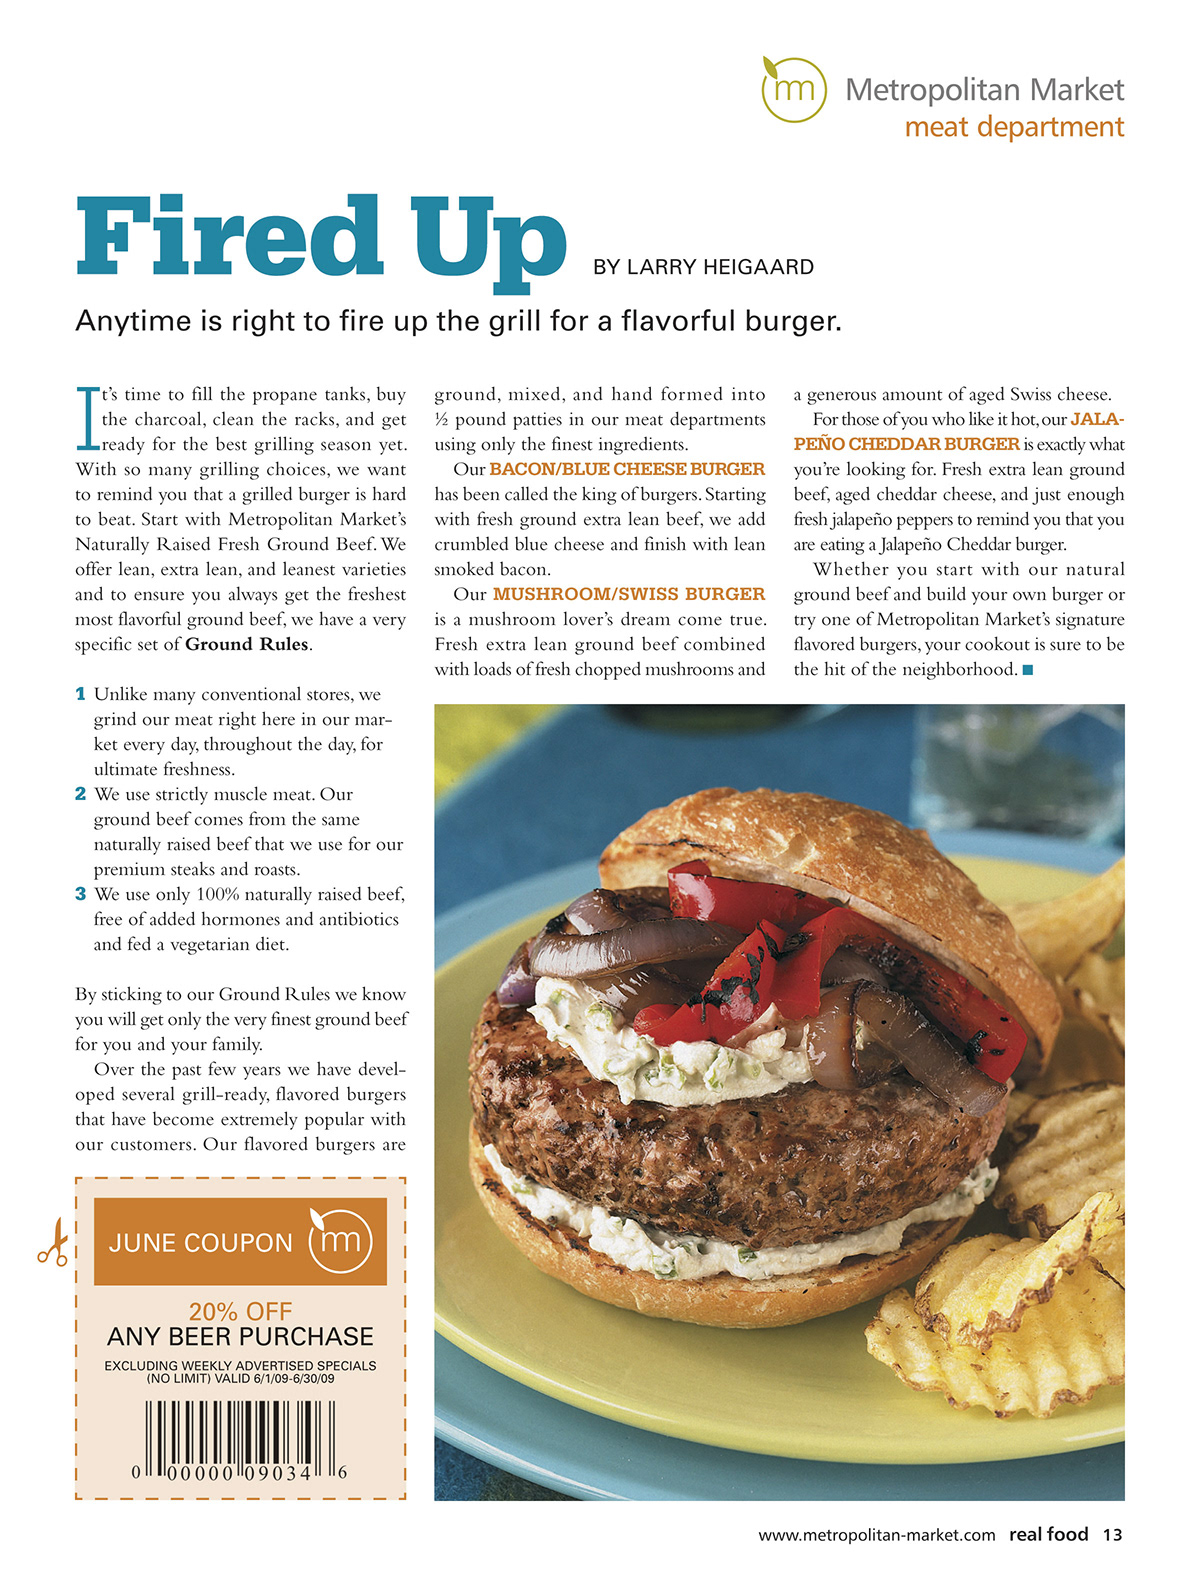 Food  real food  Magazine  page layout